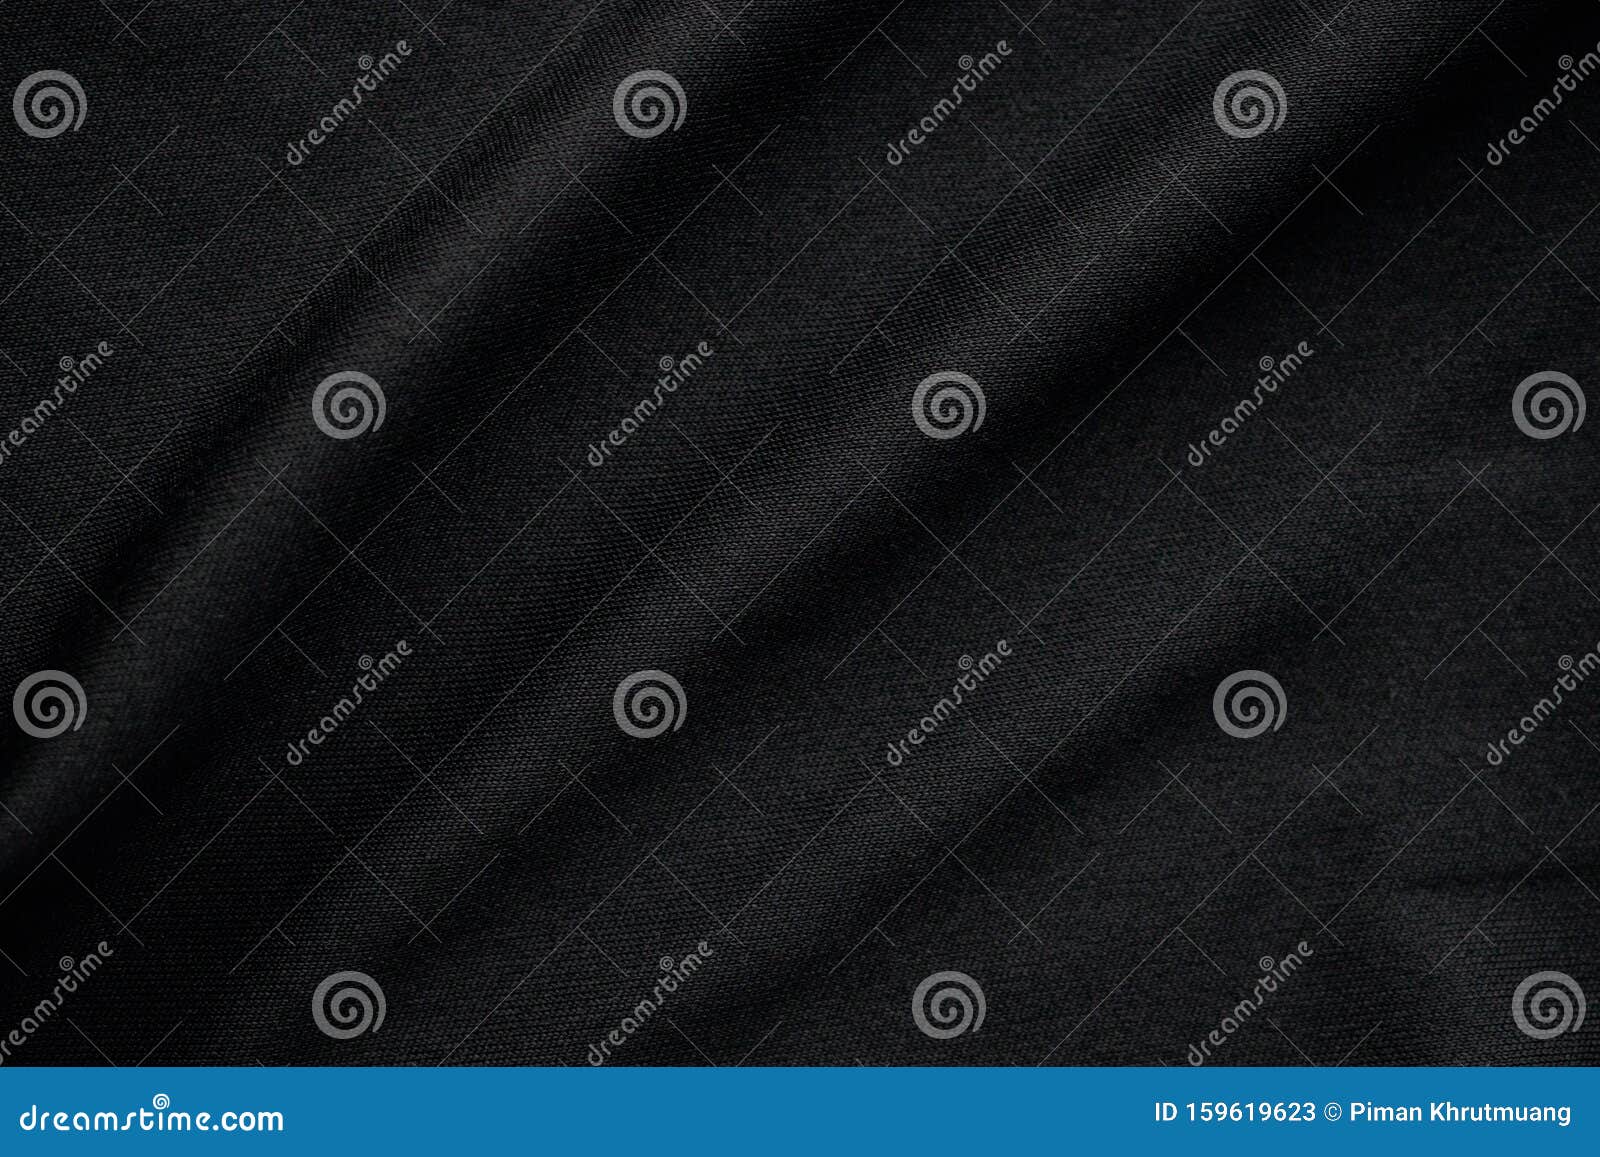 Abstract Black Fabric Cloth Texture Background Stock Image - Image of ...